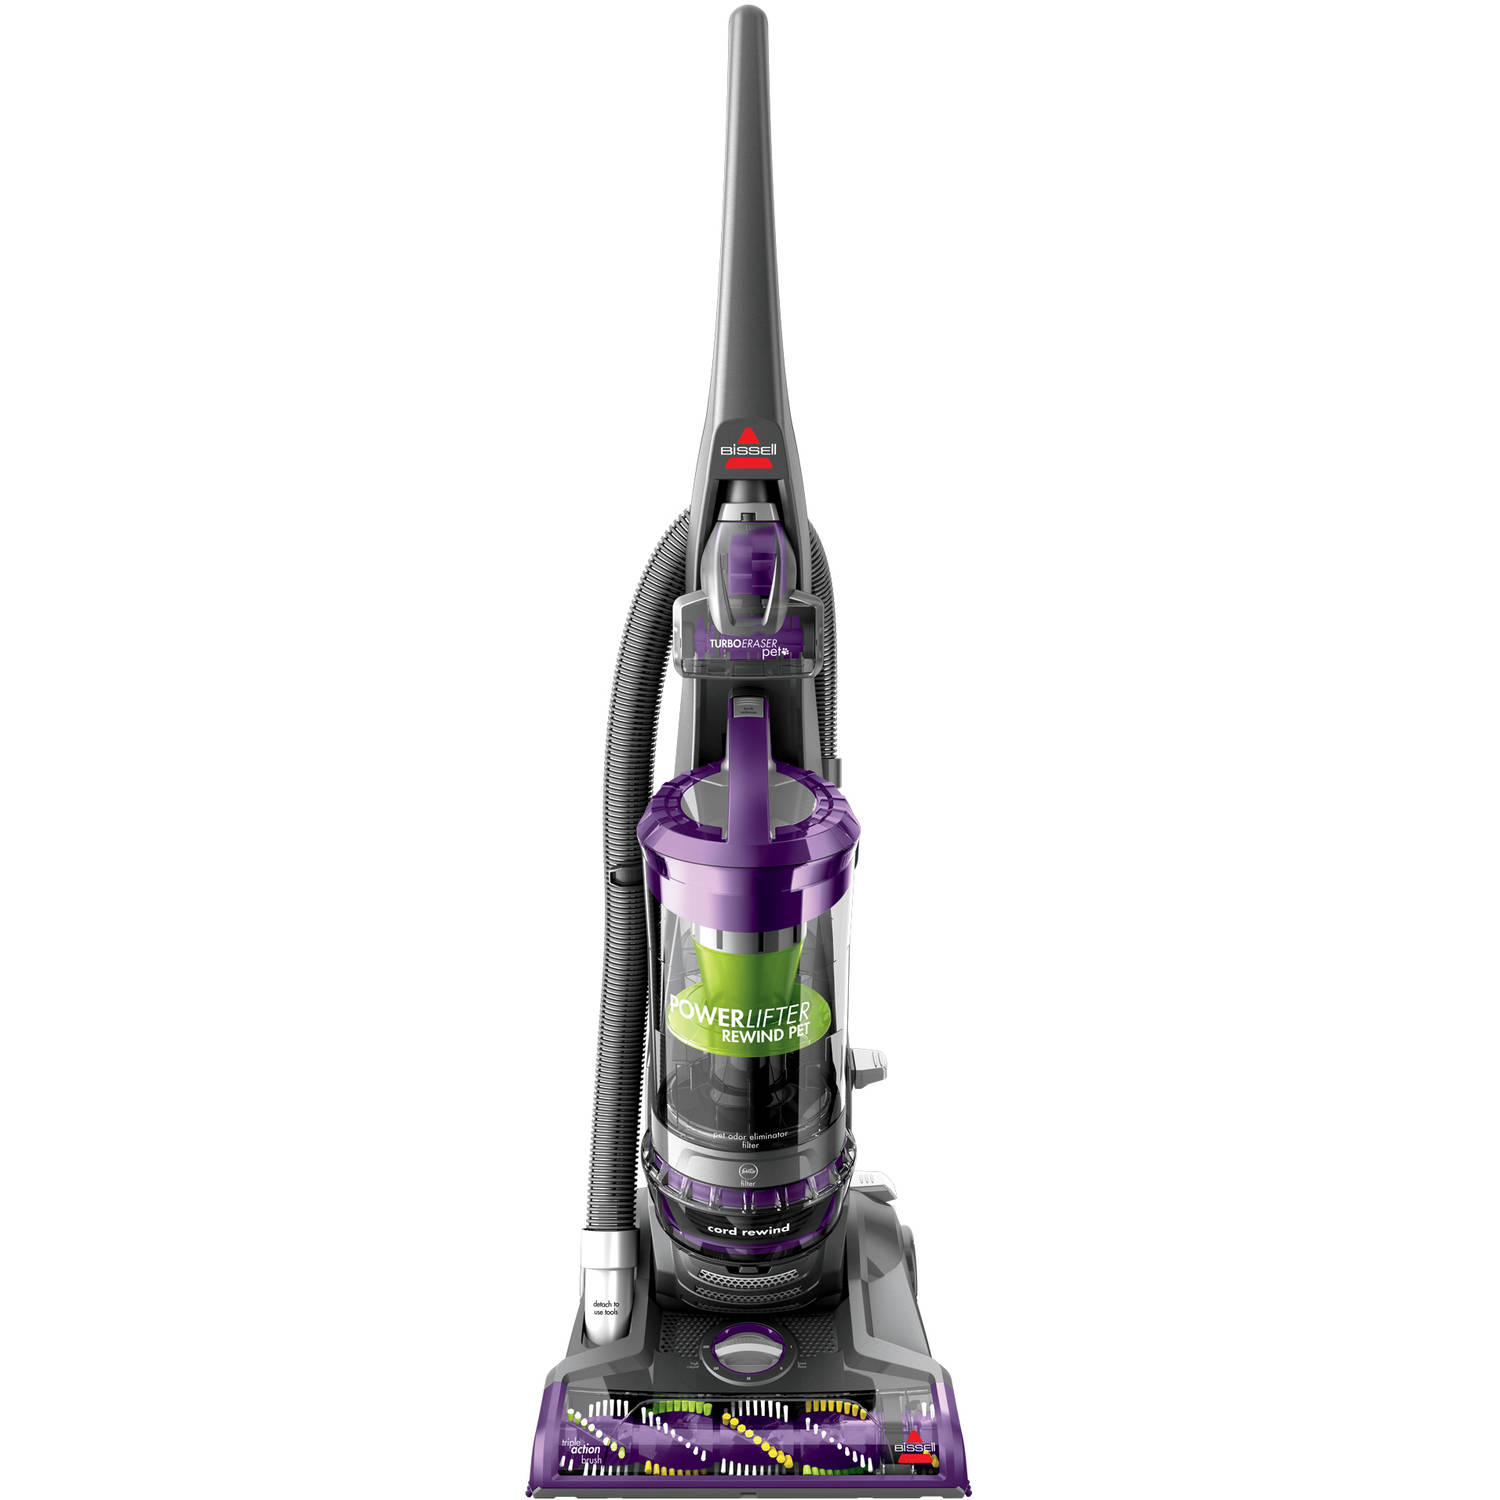 Bissell PowerLifter Pet Rewind Bagless Upright Vacuum Cleaner, 1792 - image 1 of 9